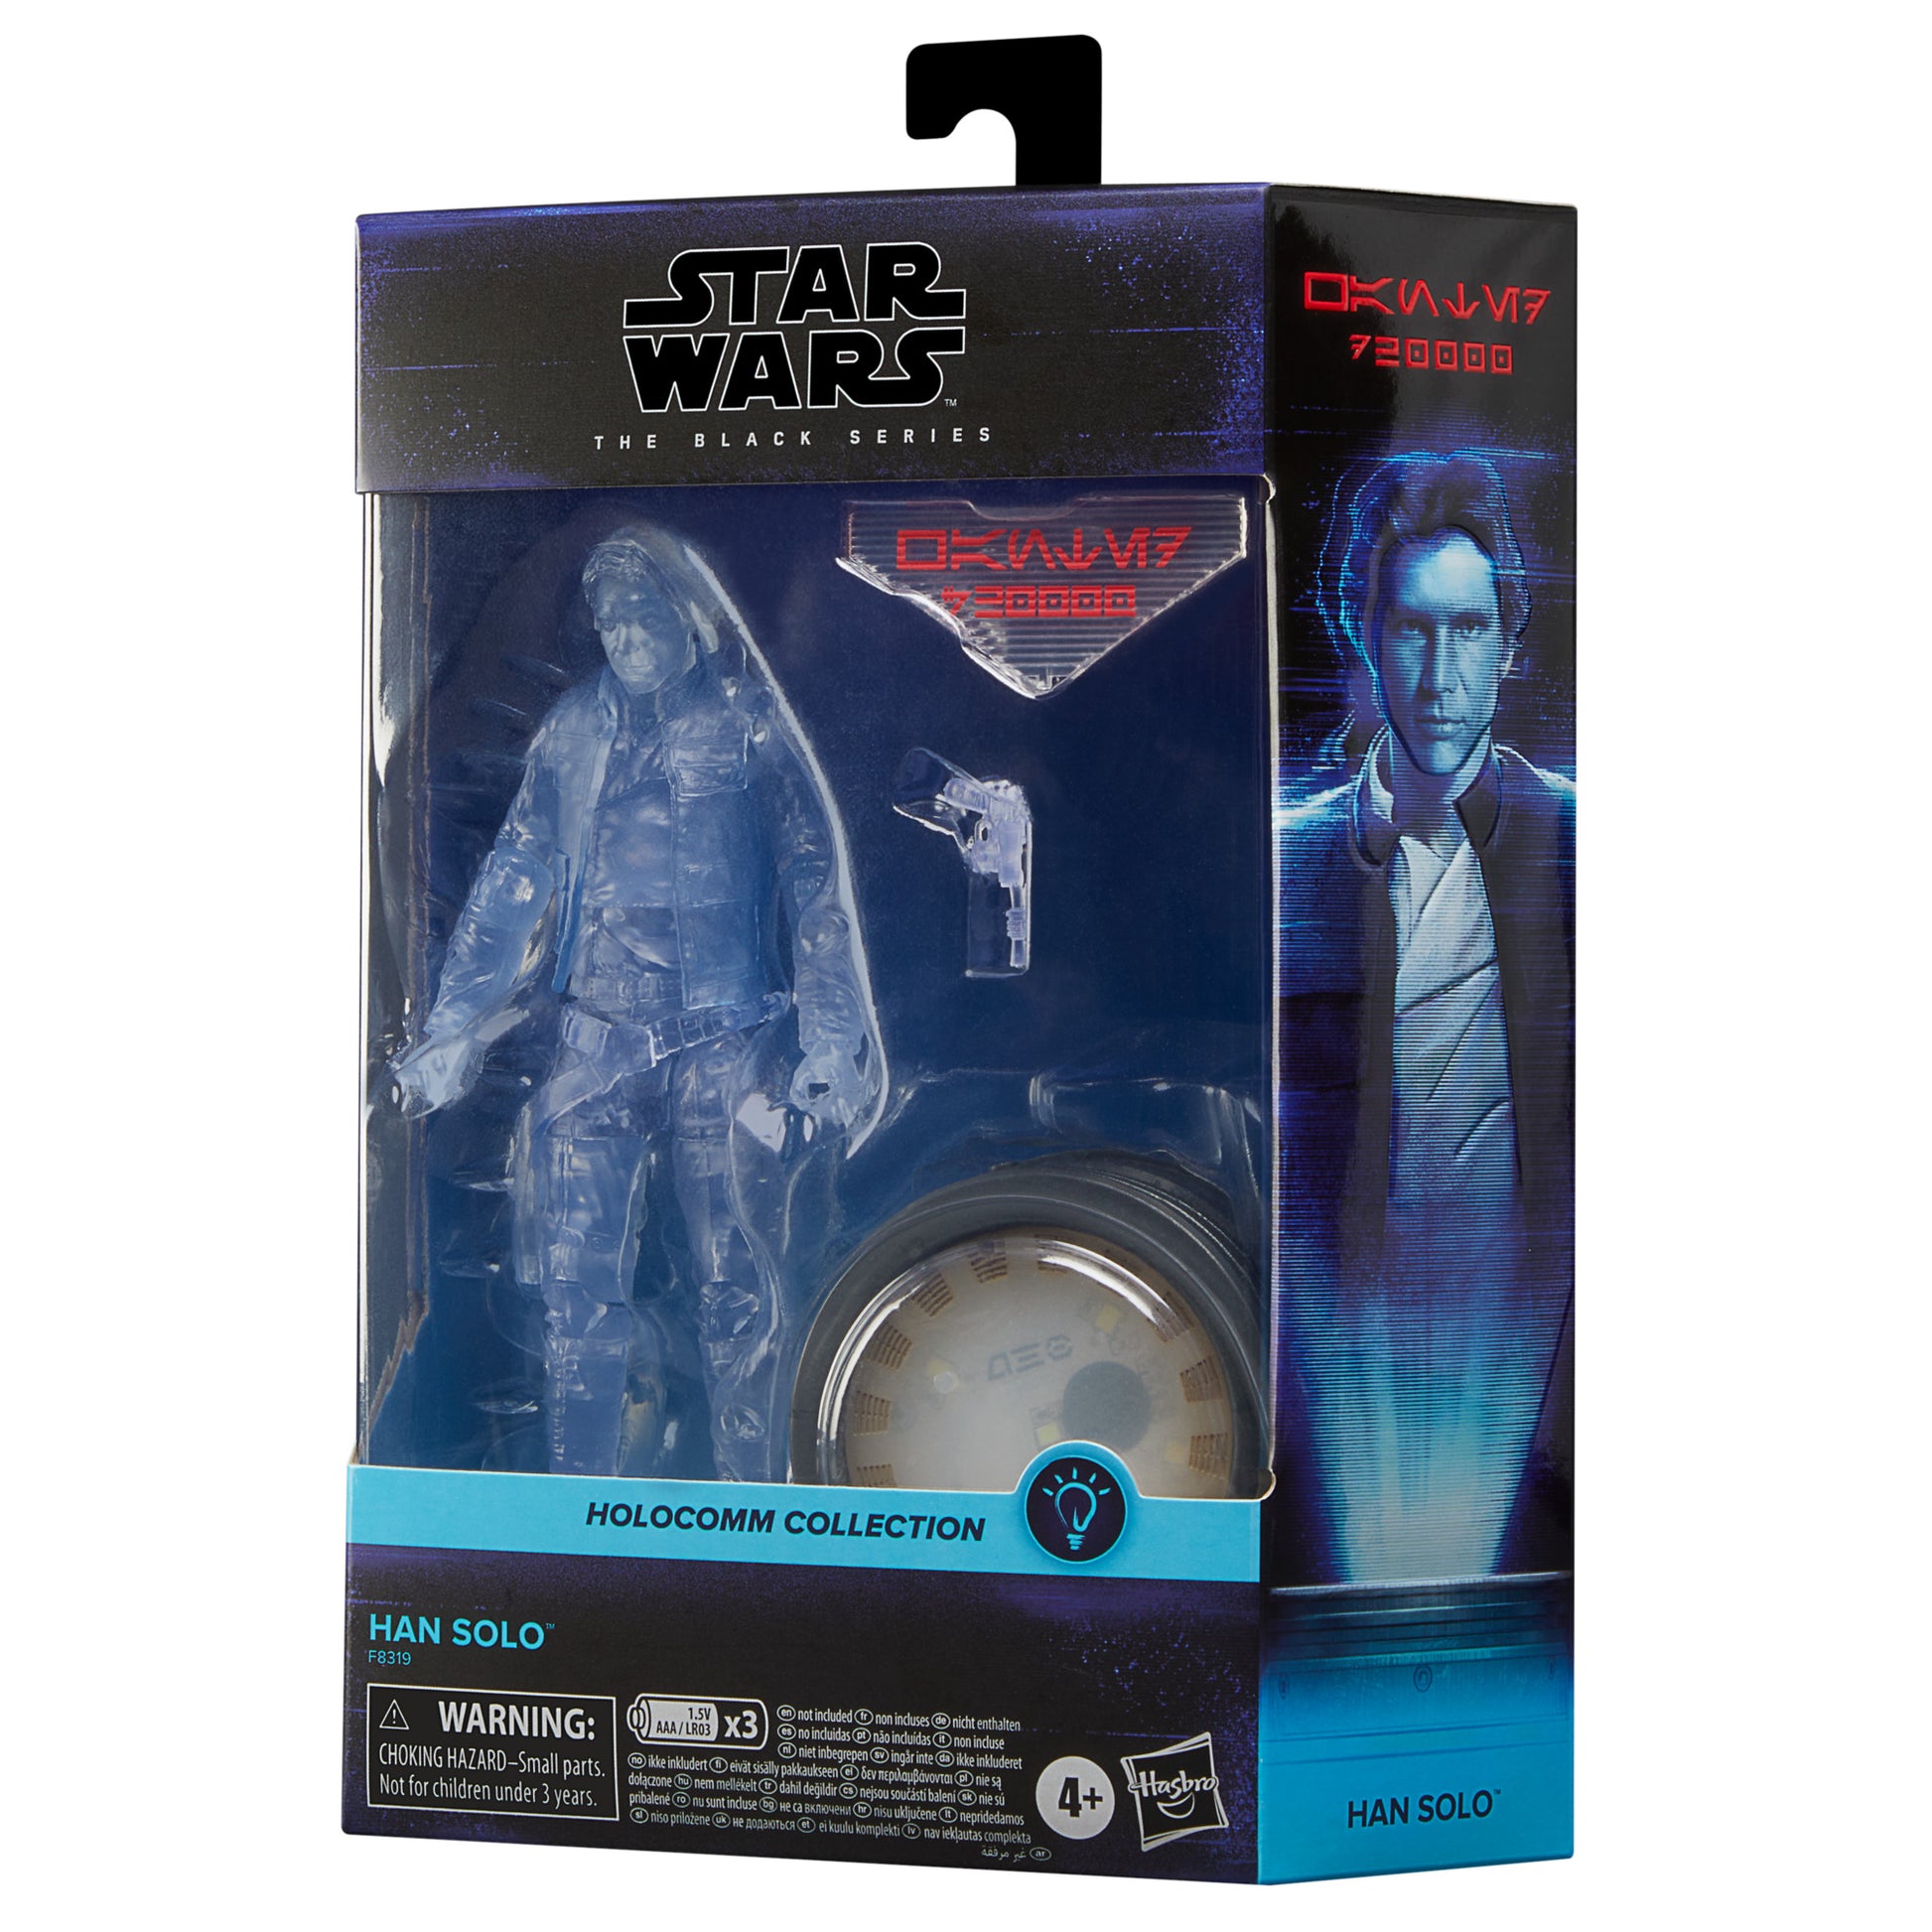 Star Wars The Black Series Holocomm Collection Han Solo, Collectible 6 Inch Action Figure with Light-Up Holopuck